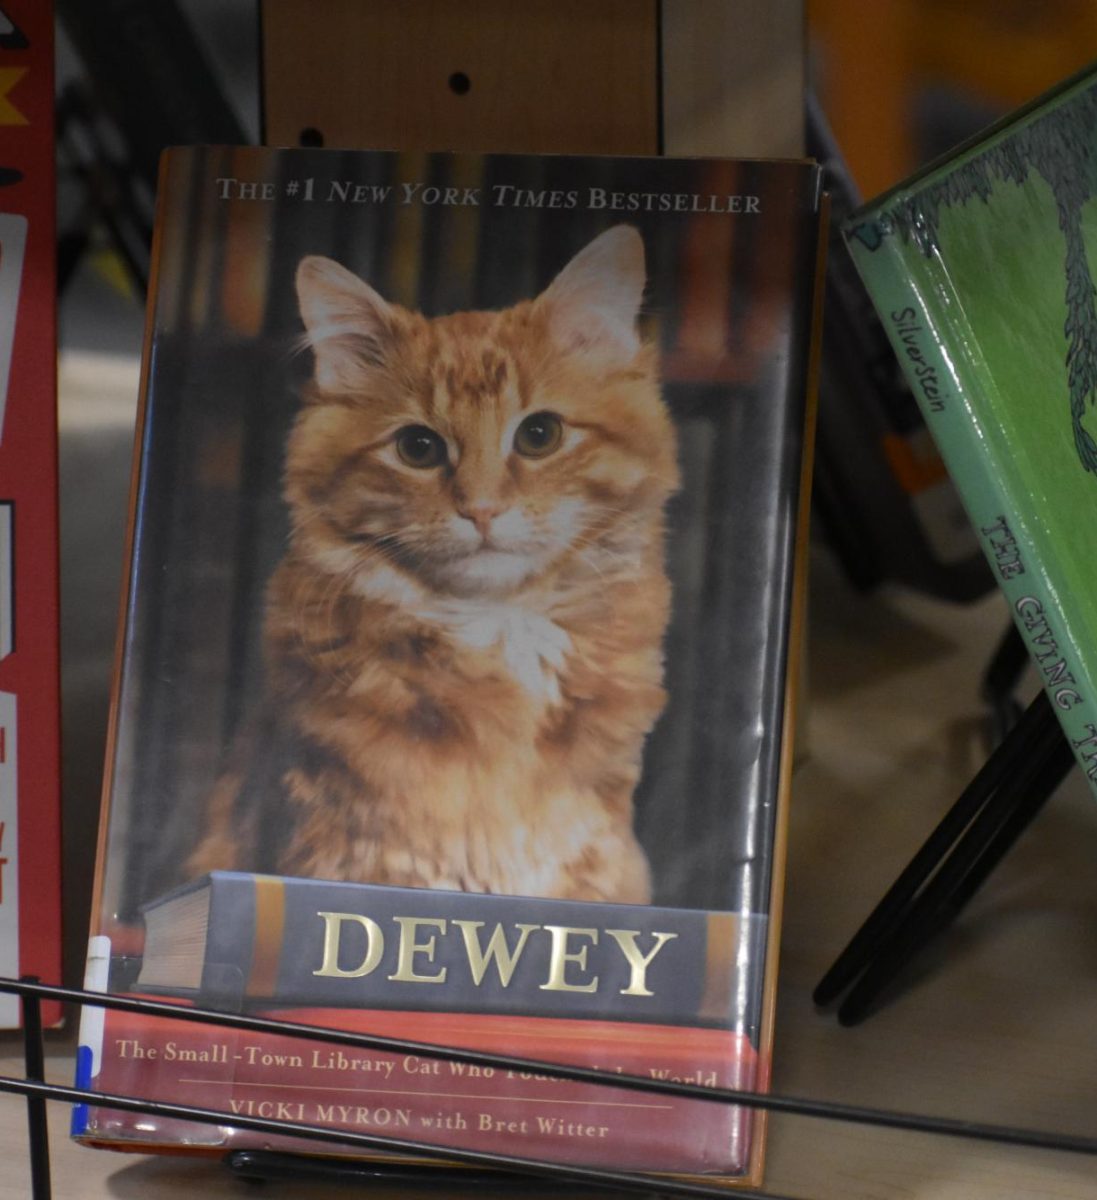 The library features Dewey, a true, heartwarming story about a stray cat who had been found in a library return box during the winter in a small town in Iowa. He had lived his life in the library, and was an extremely friendly and loveable cat.